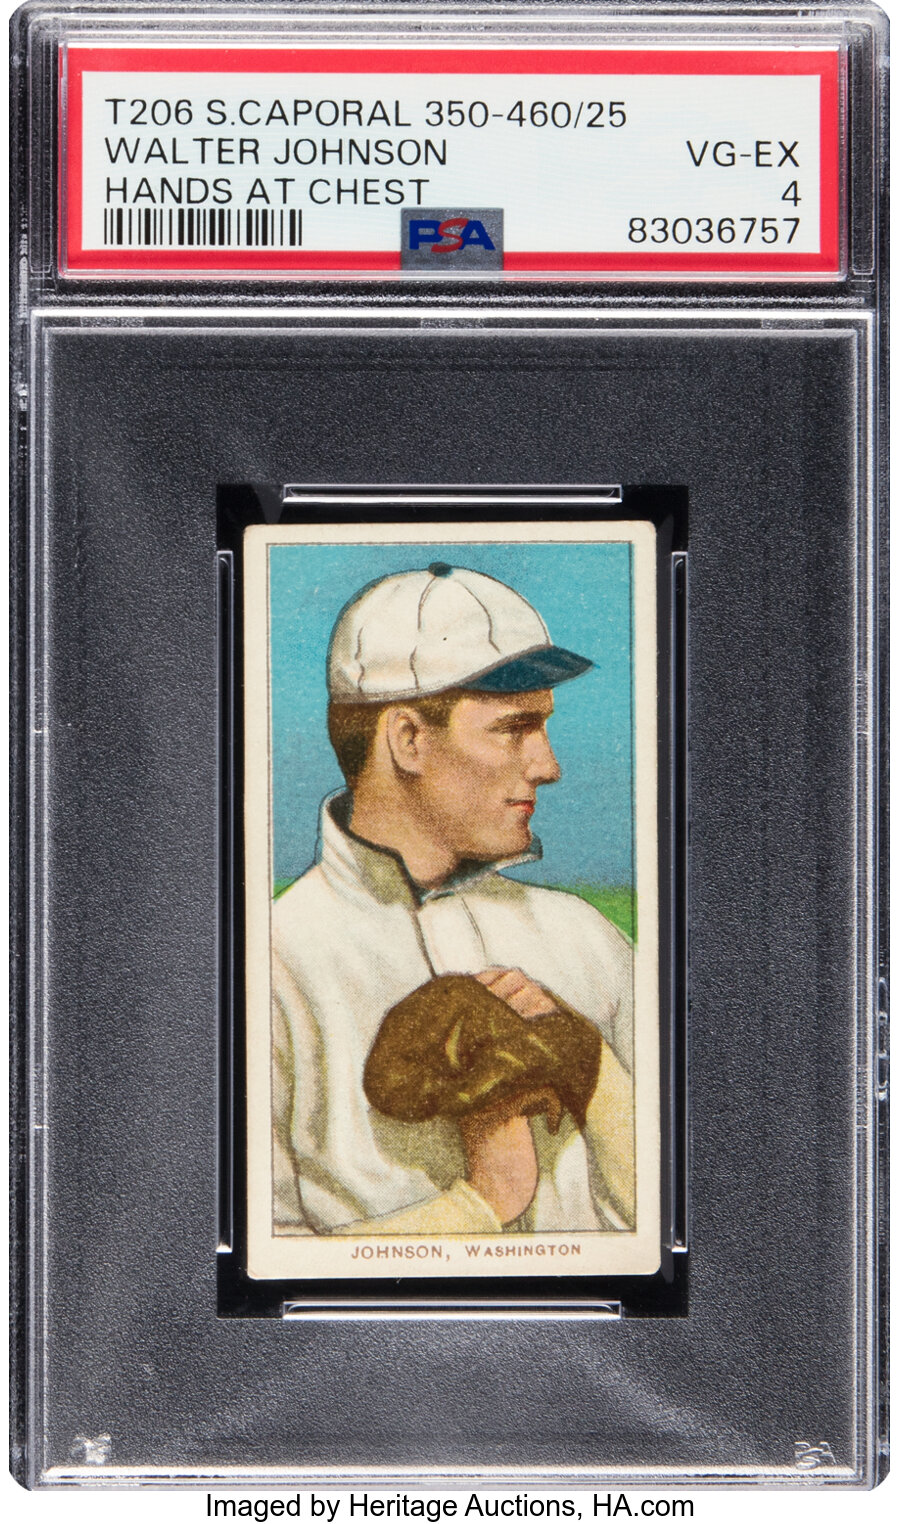 1909-11 T206 Sweet Caporal Walter Johnson 350-460/25 (Hands at Chest) PSA VG-EX 4 -- From the Ramsburg Collection